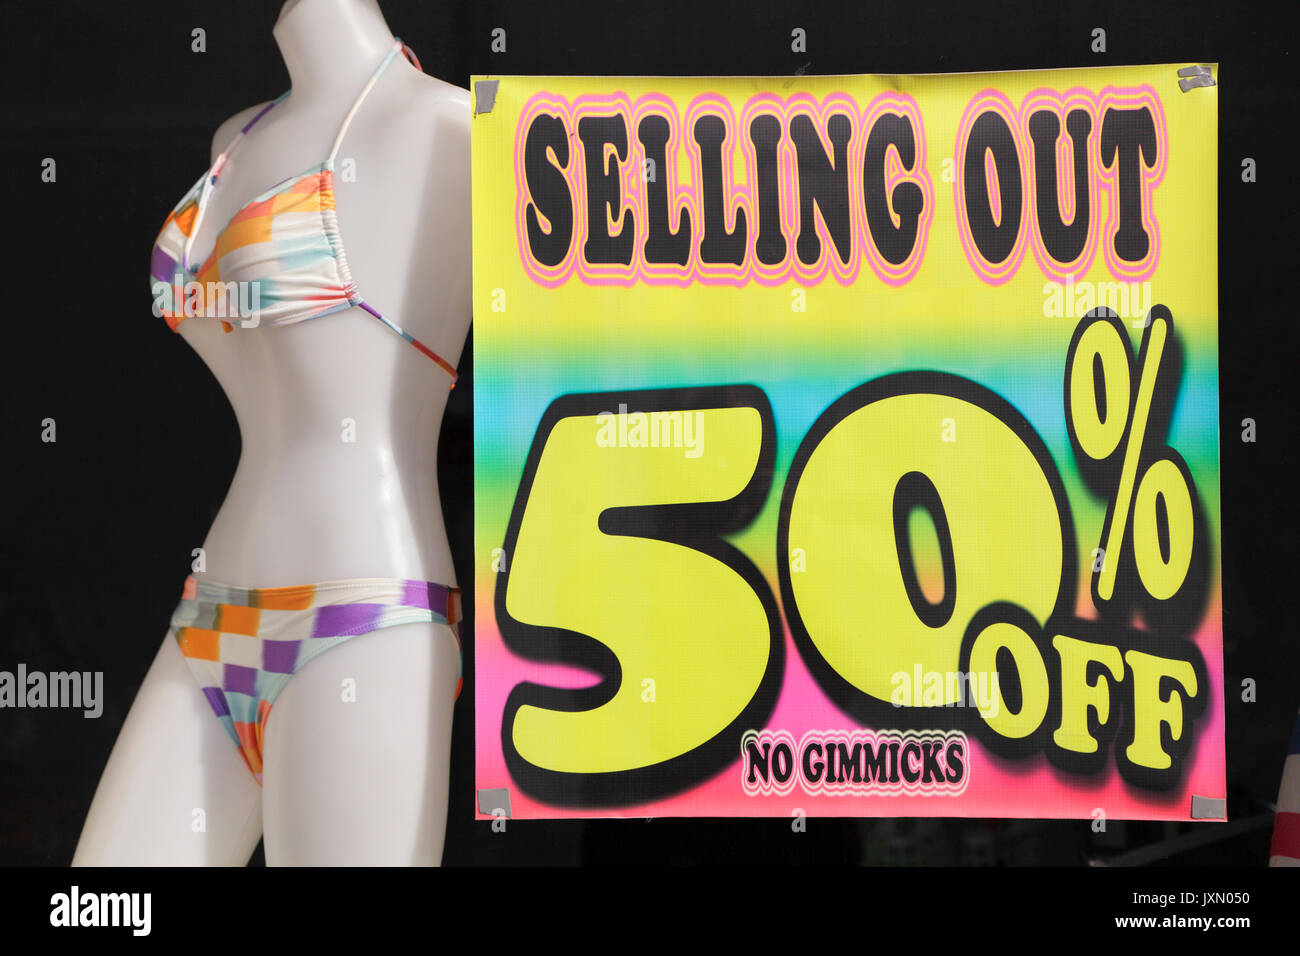 Sale sign in a store window, USA Stock Photo